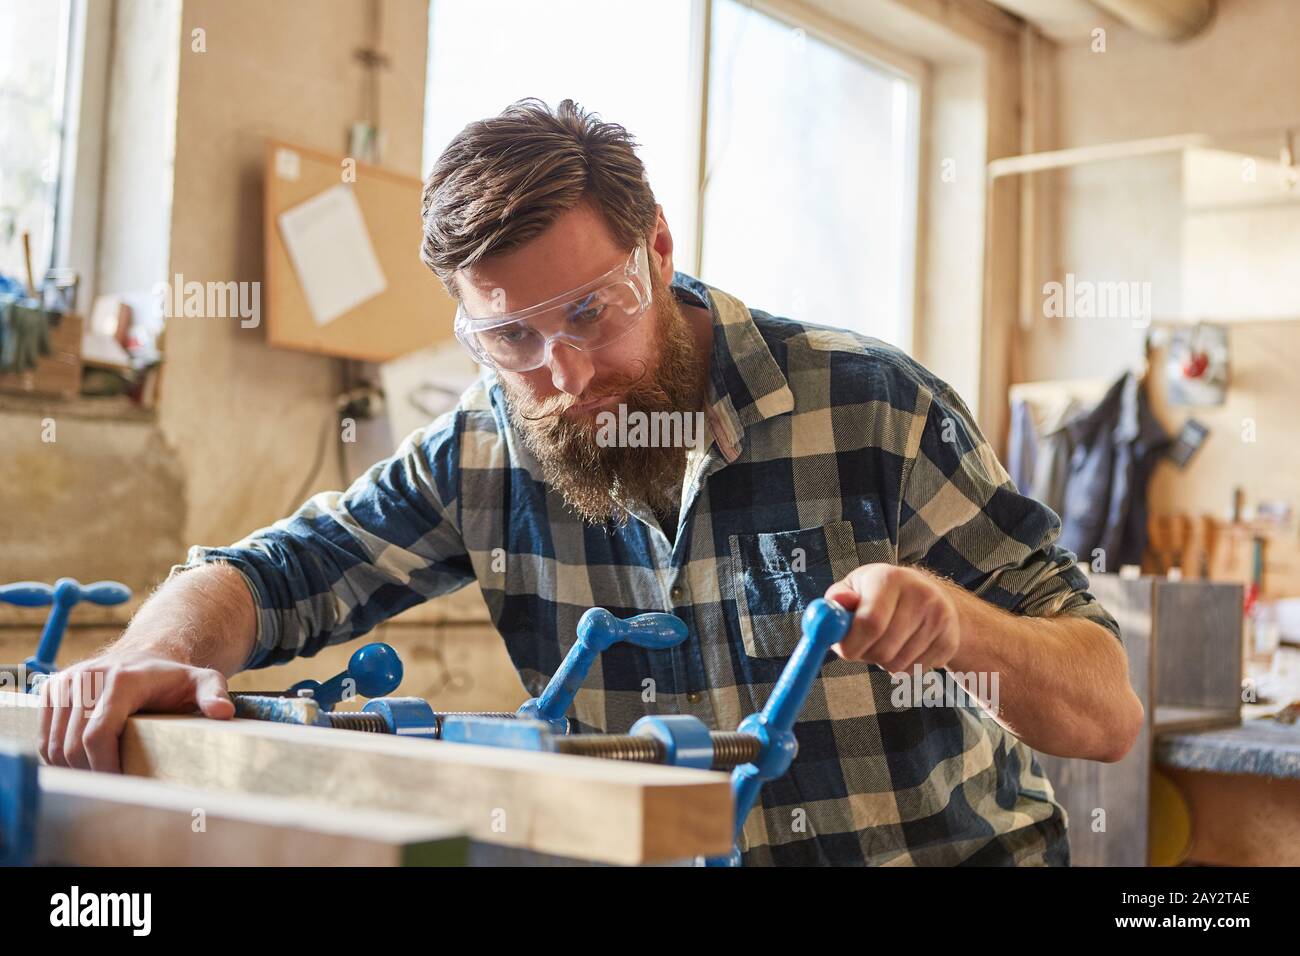 Carpenter with safety glasses works with wood on the vice in the carpentry Stock Photo